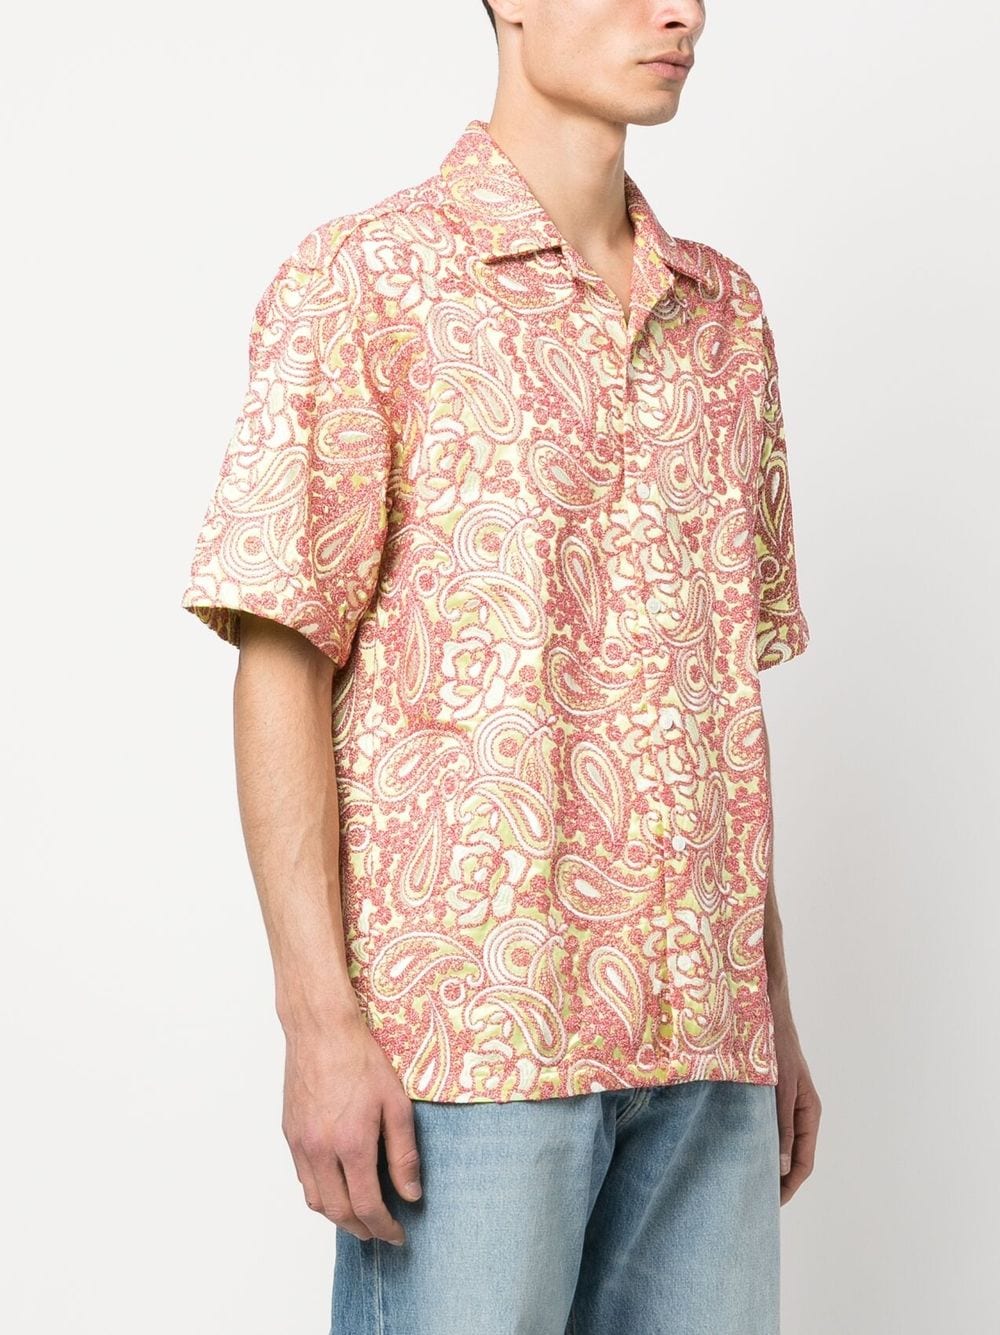 Bluemarble BLUEMARBLE- Short Sleeve Embroidered Shirt